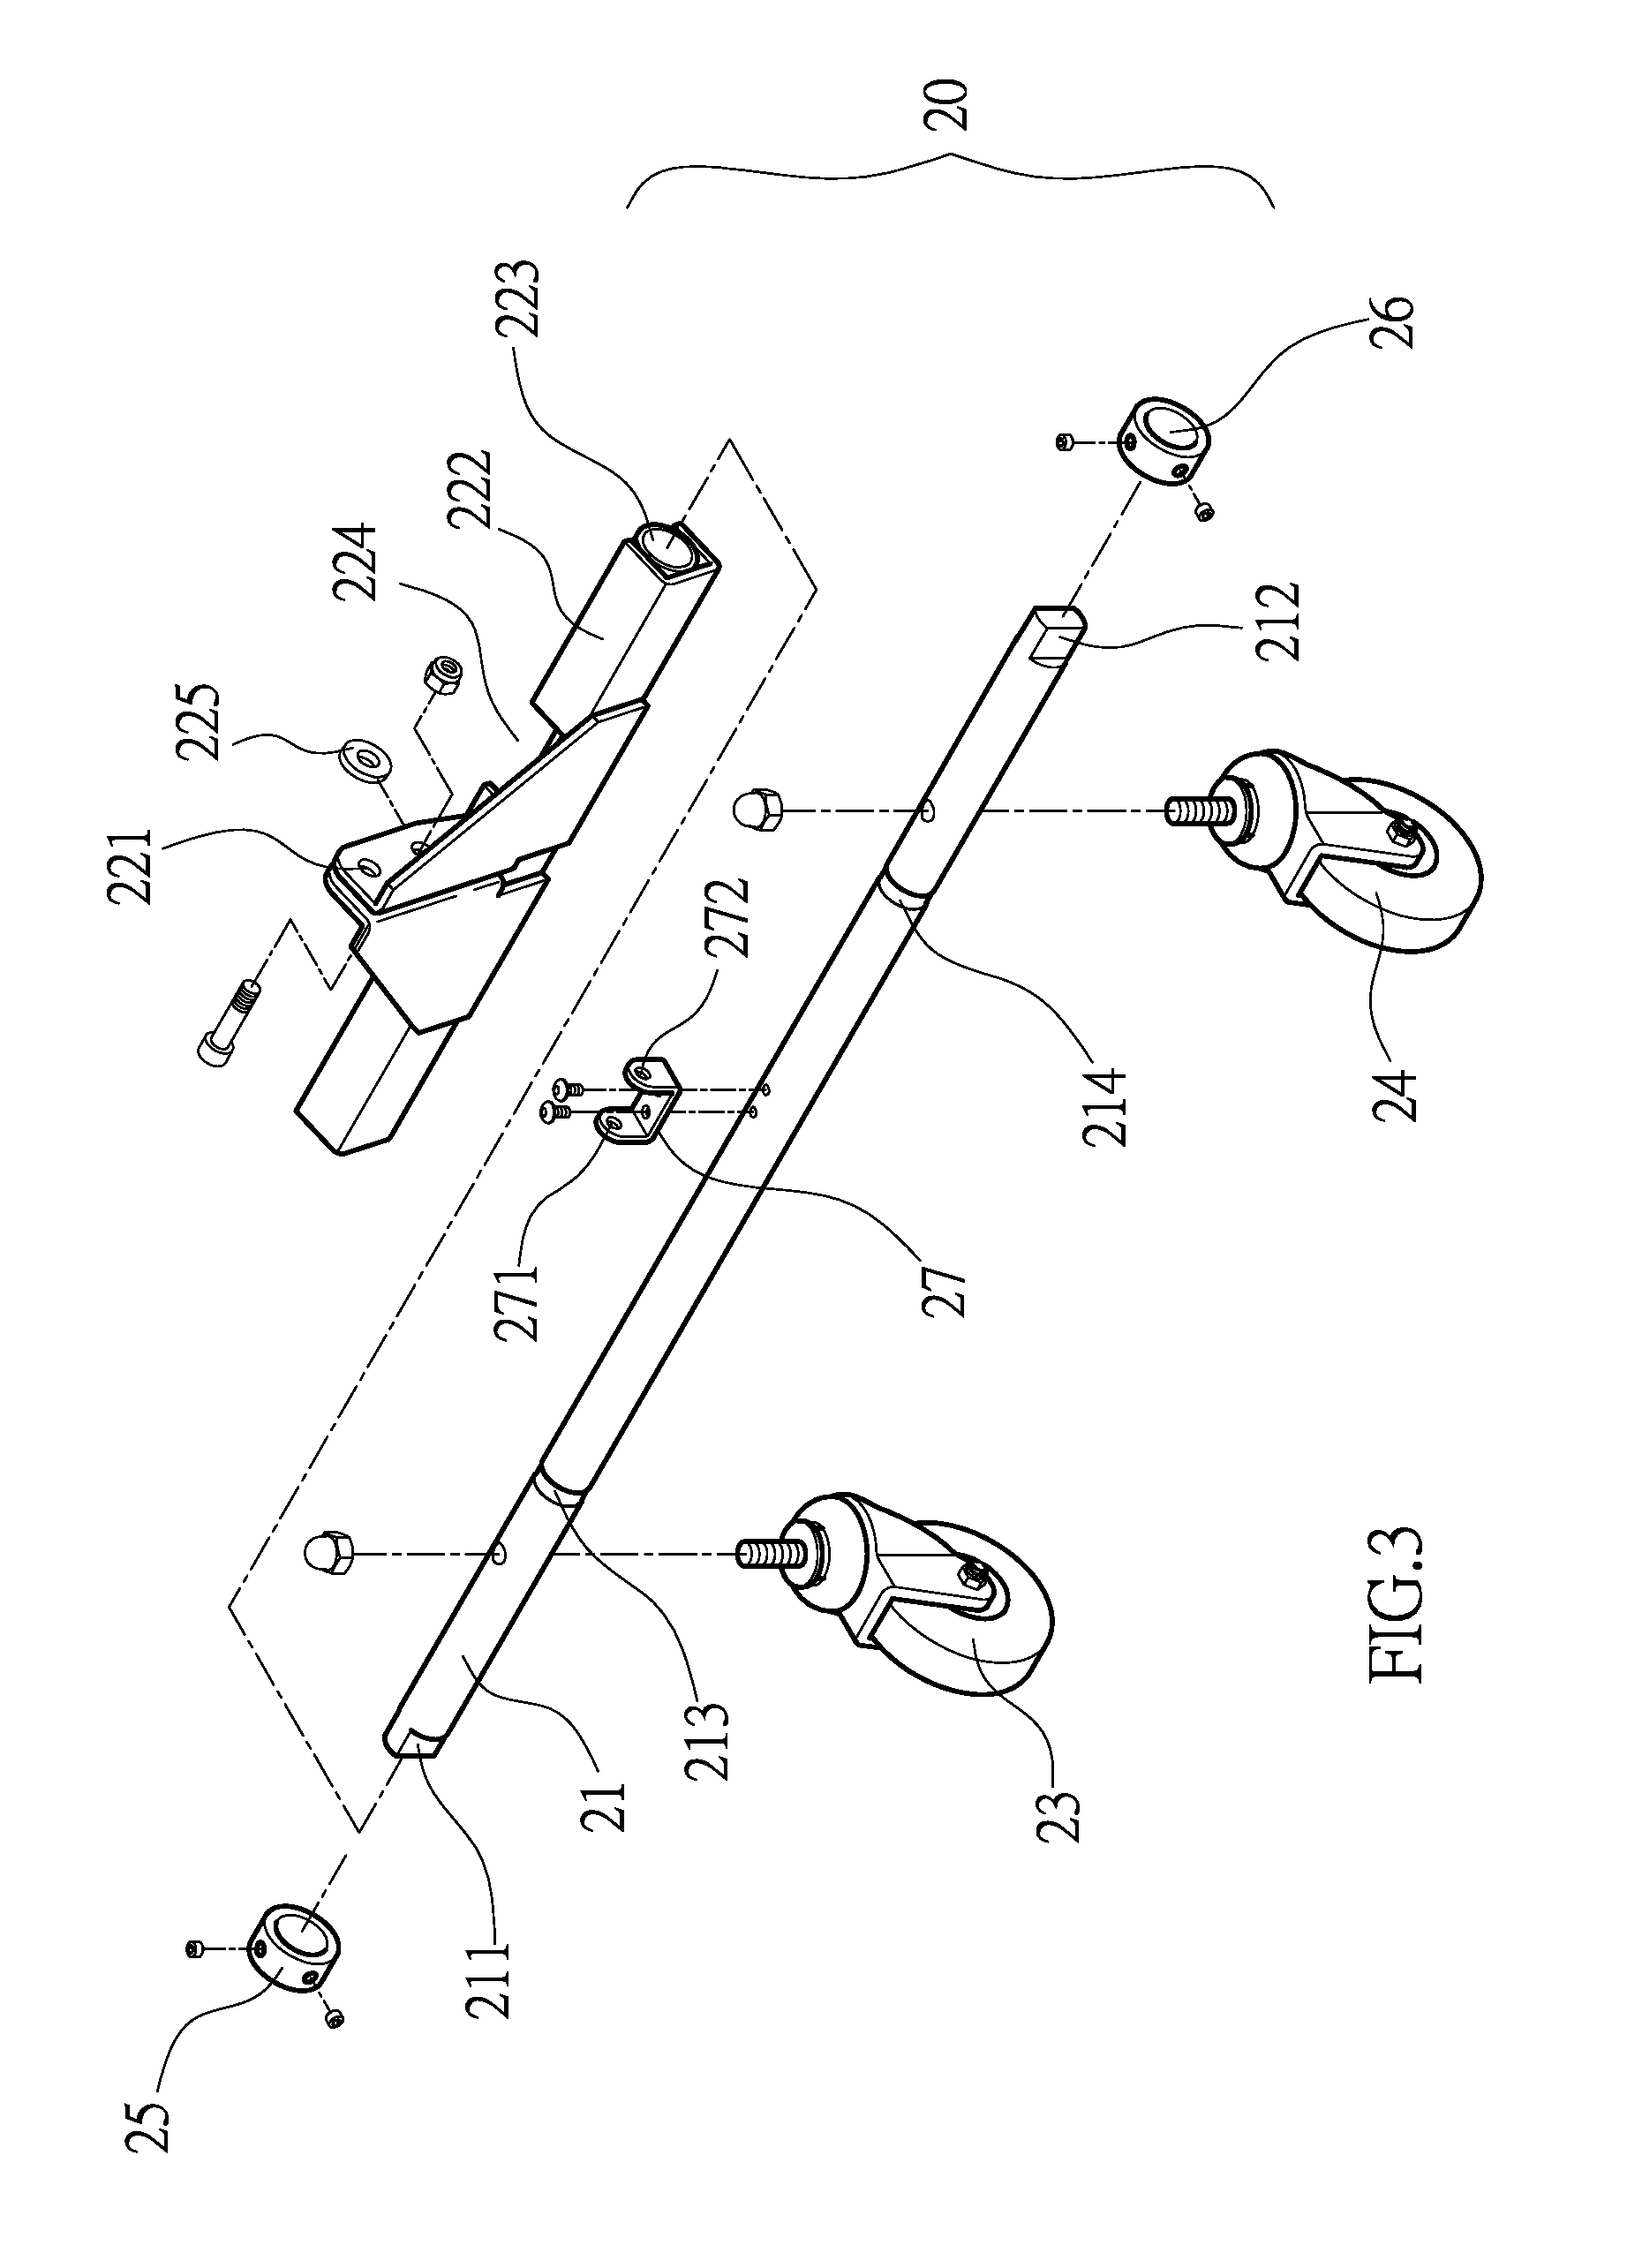 Movement Auxiliary Device for Machine Stand